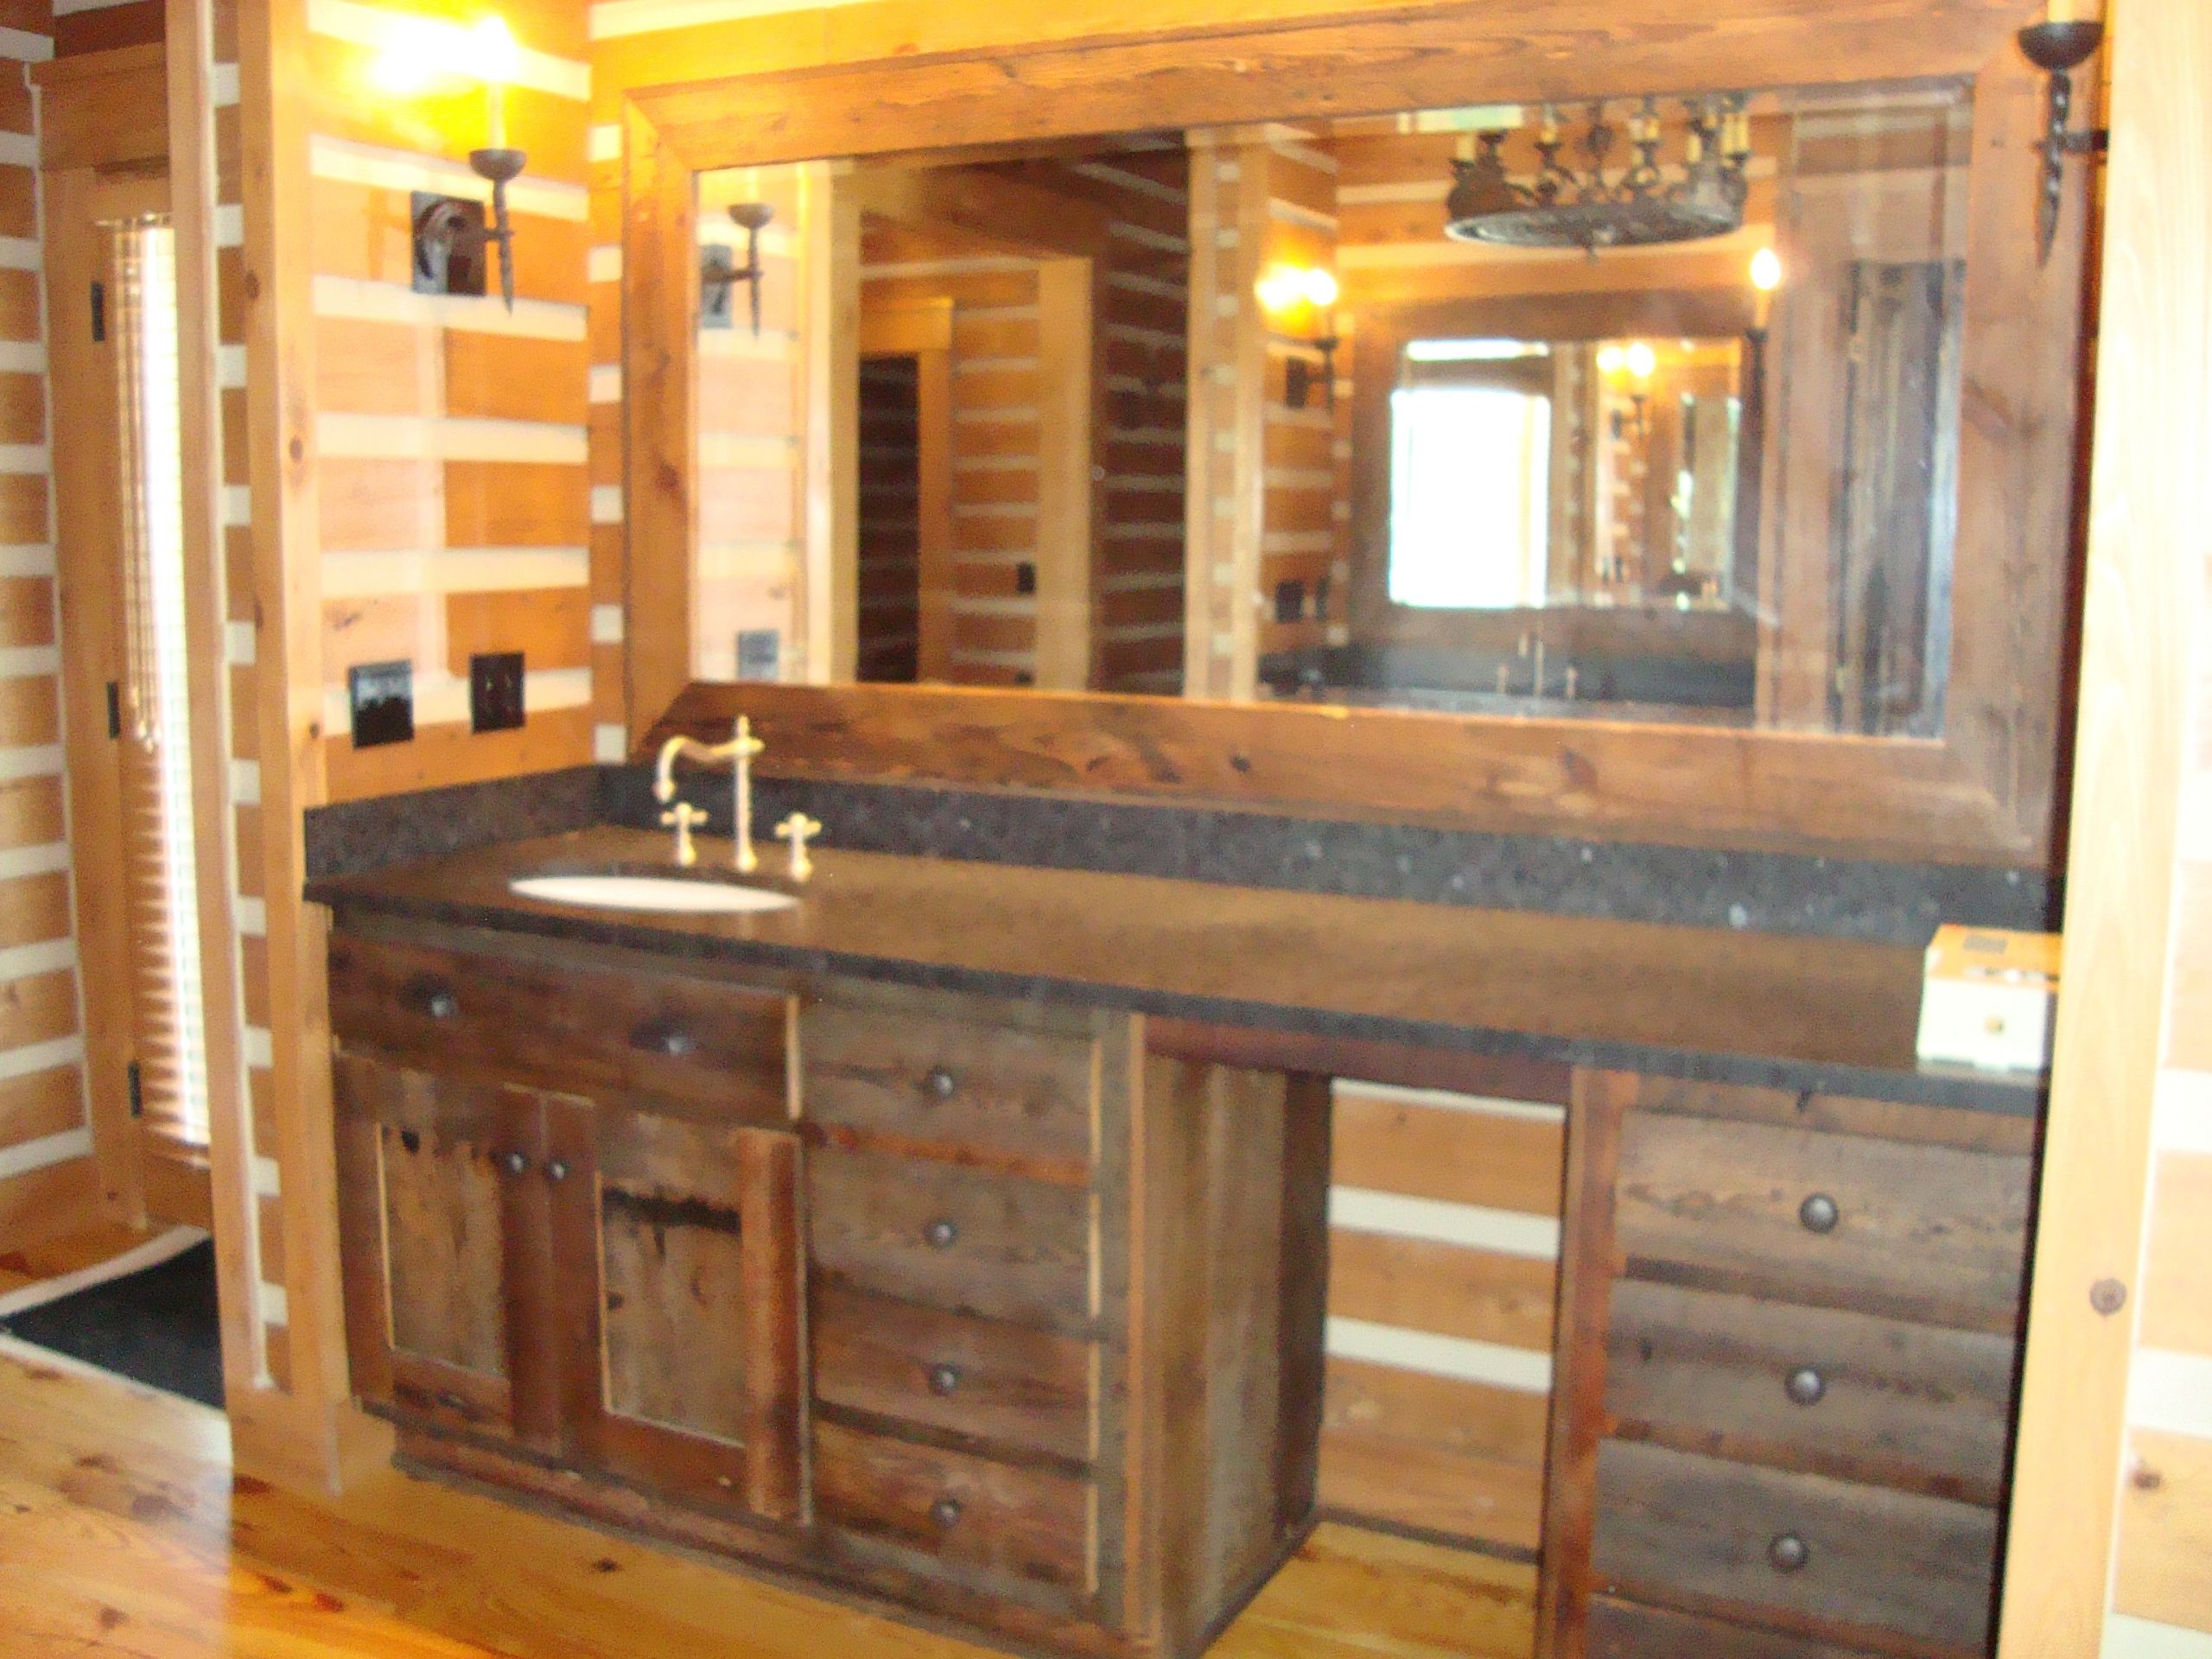 DIY Wood Plank Countertops
 20 Ideas for Installing a Wooden Countertop at Your Home